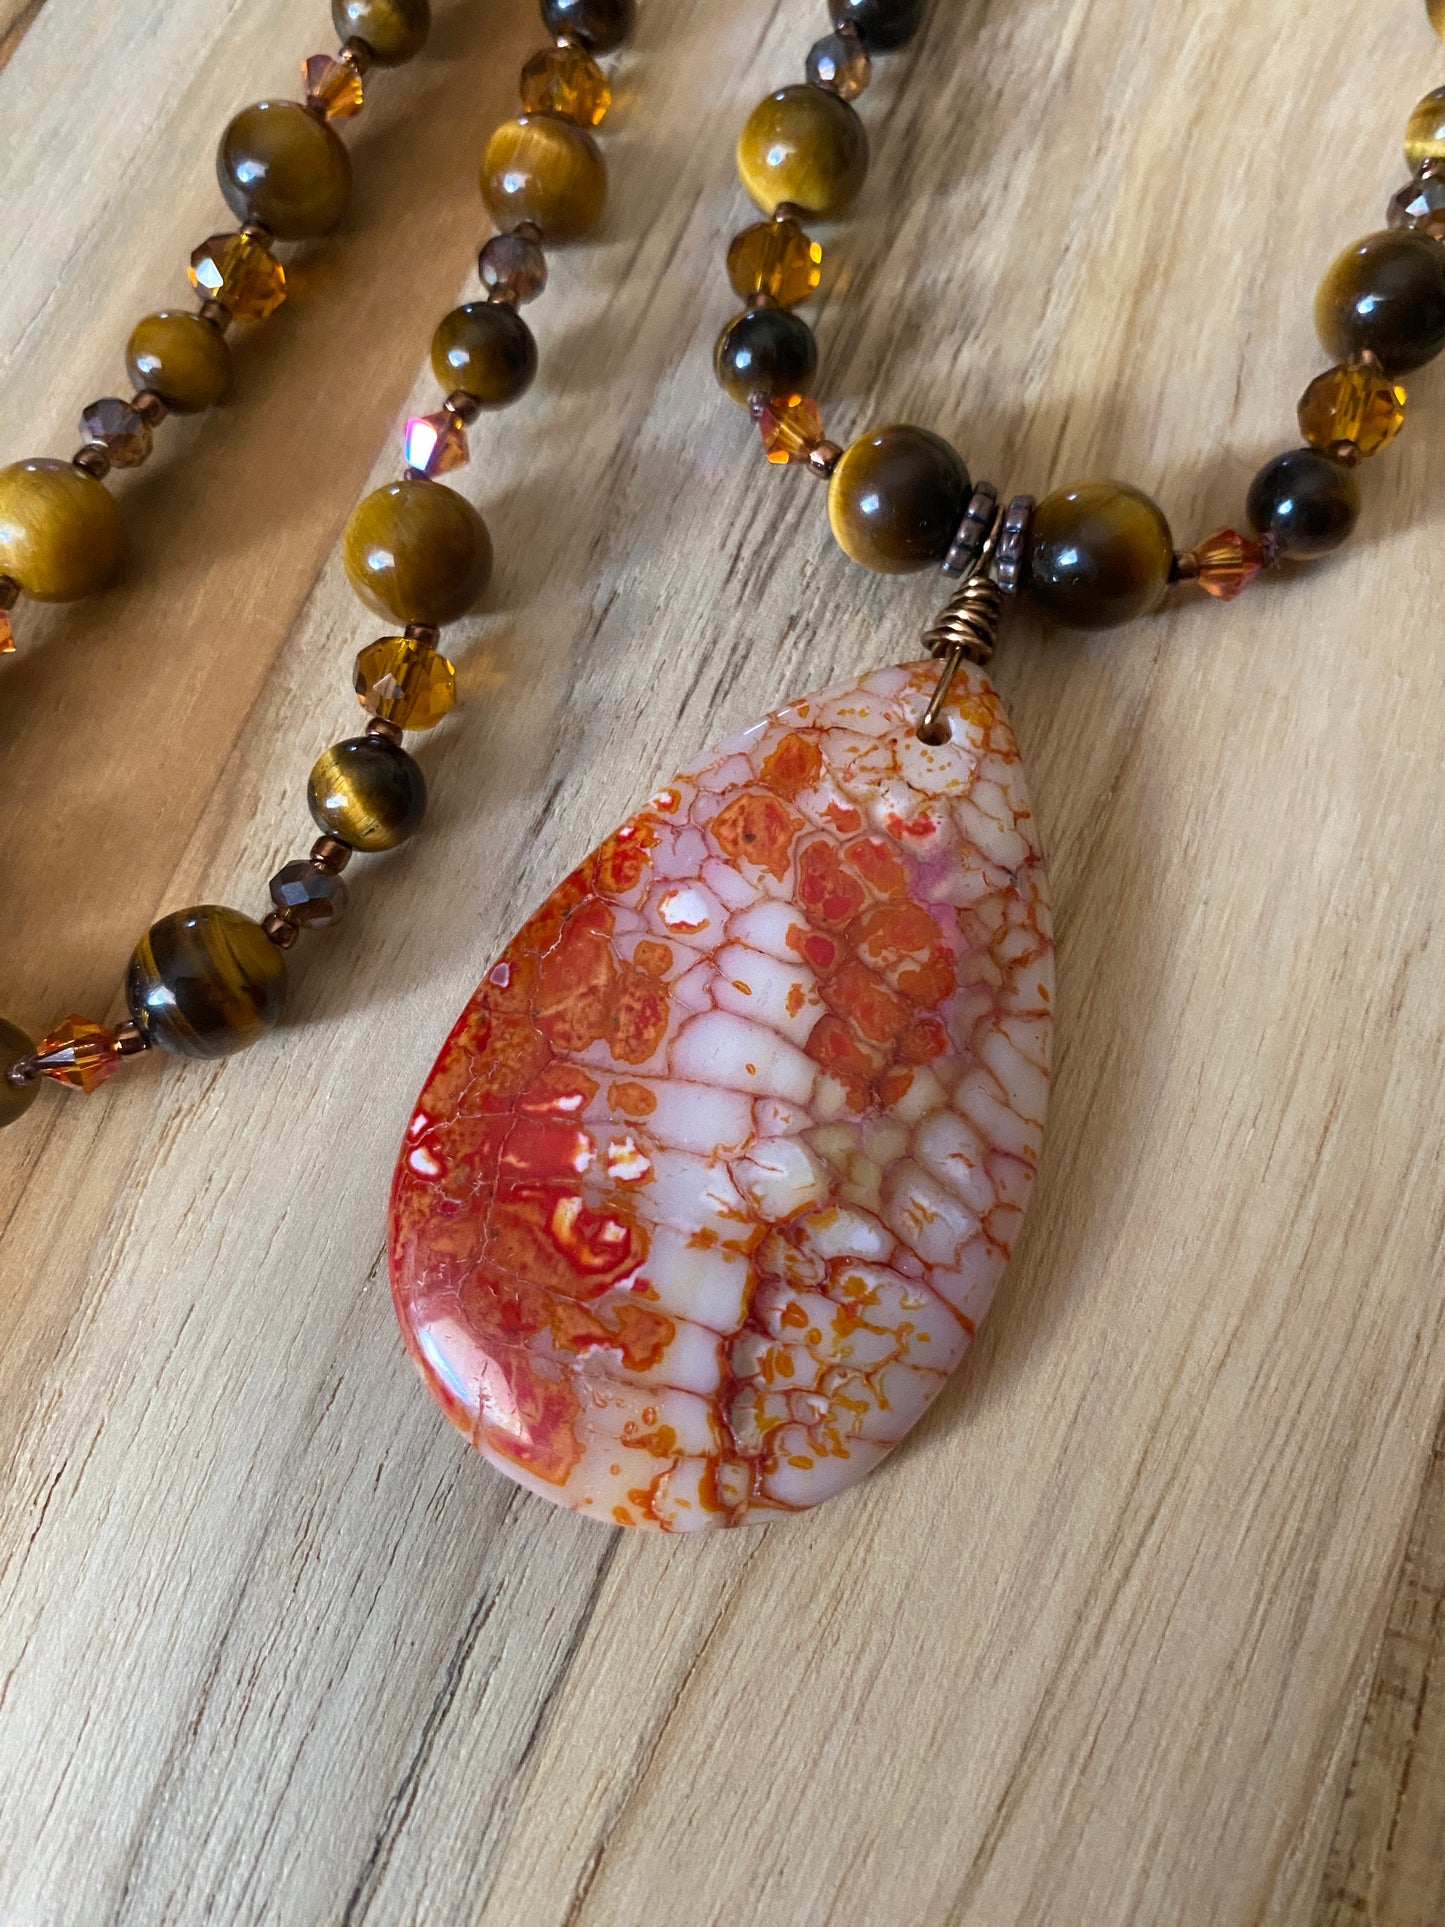 Long Dragon Vein Agate Pendant Necklace with Tiger Eye and Crystal Beads